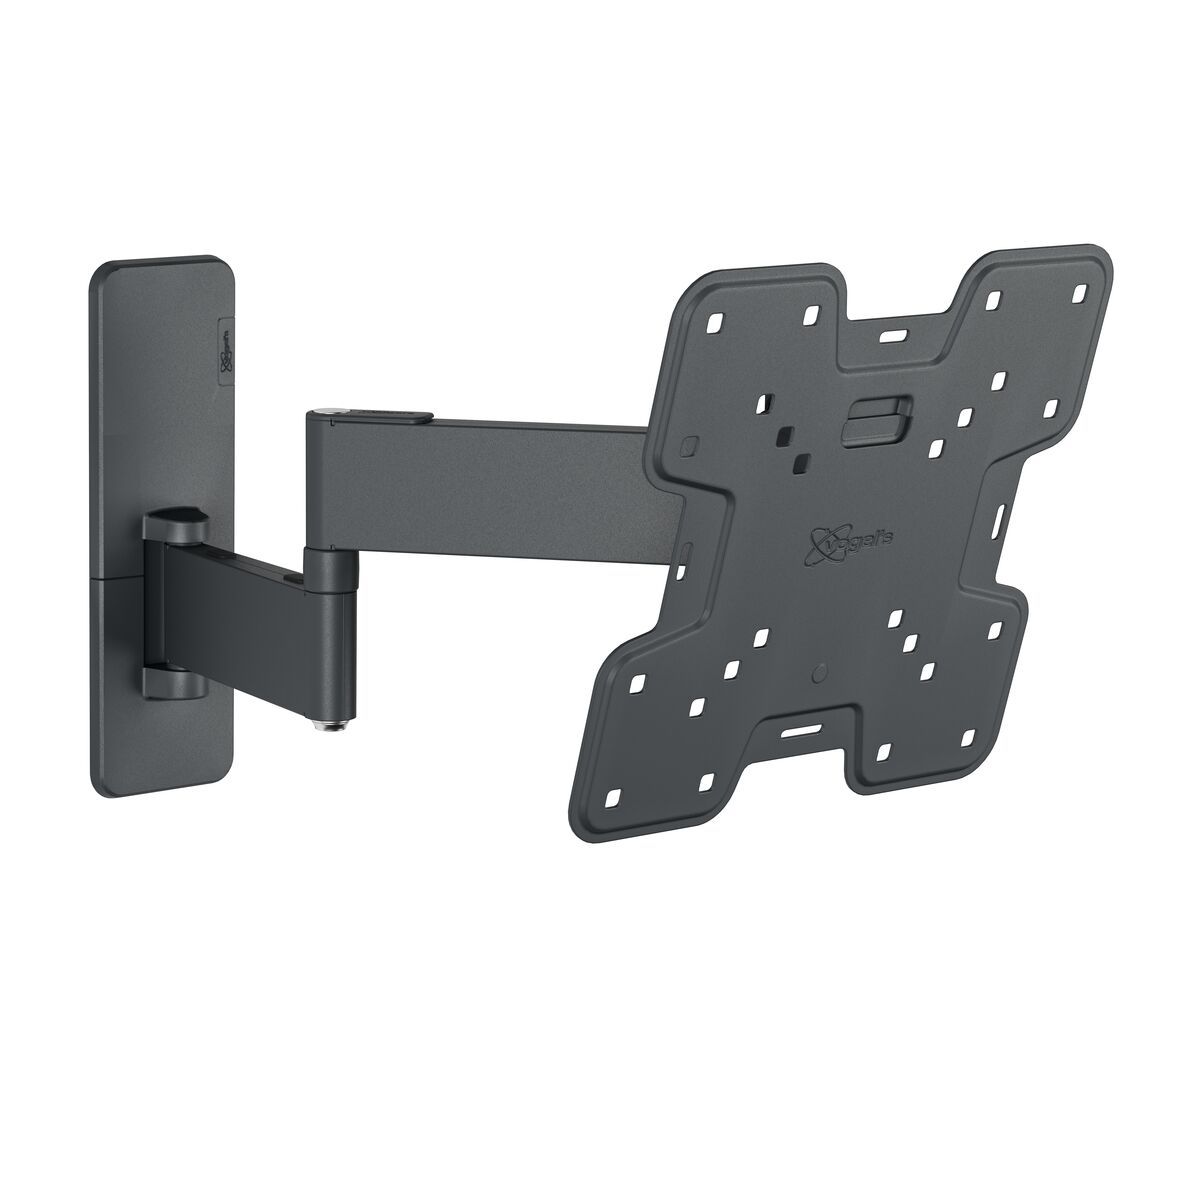 Vogel's TVM 1243 Full-Motion TV Wall Mount - Suitable for 19 up to 43 inch TVs - Full motion (up to 180°) swivel - Tilt up to 15° - Product